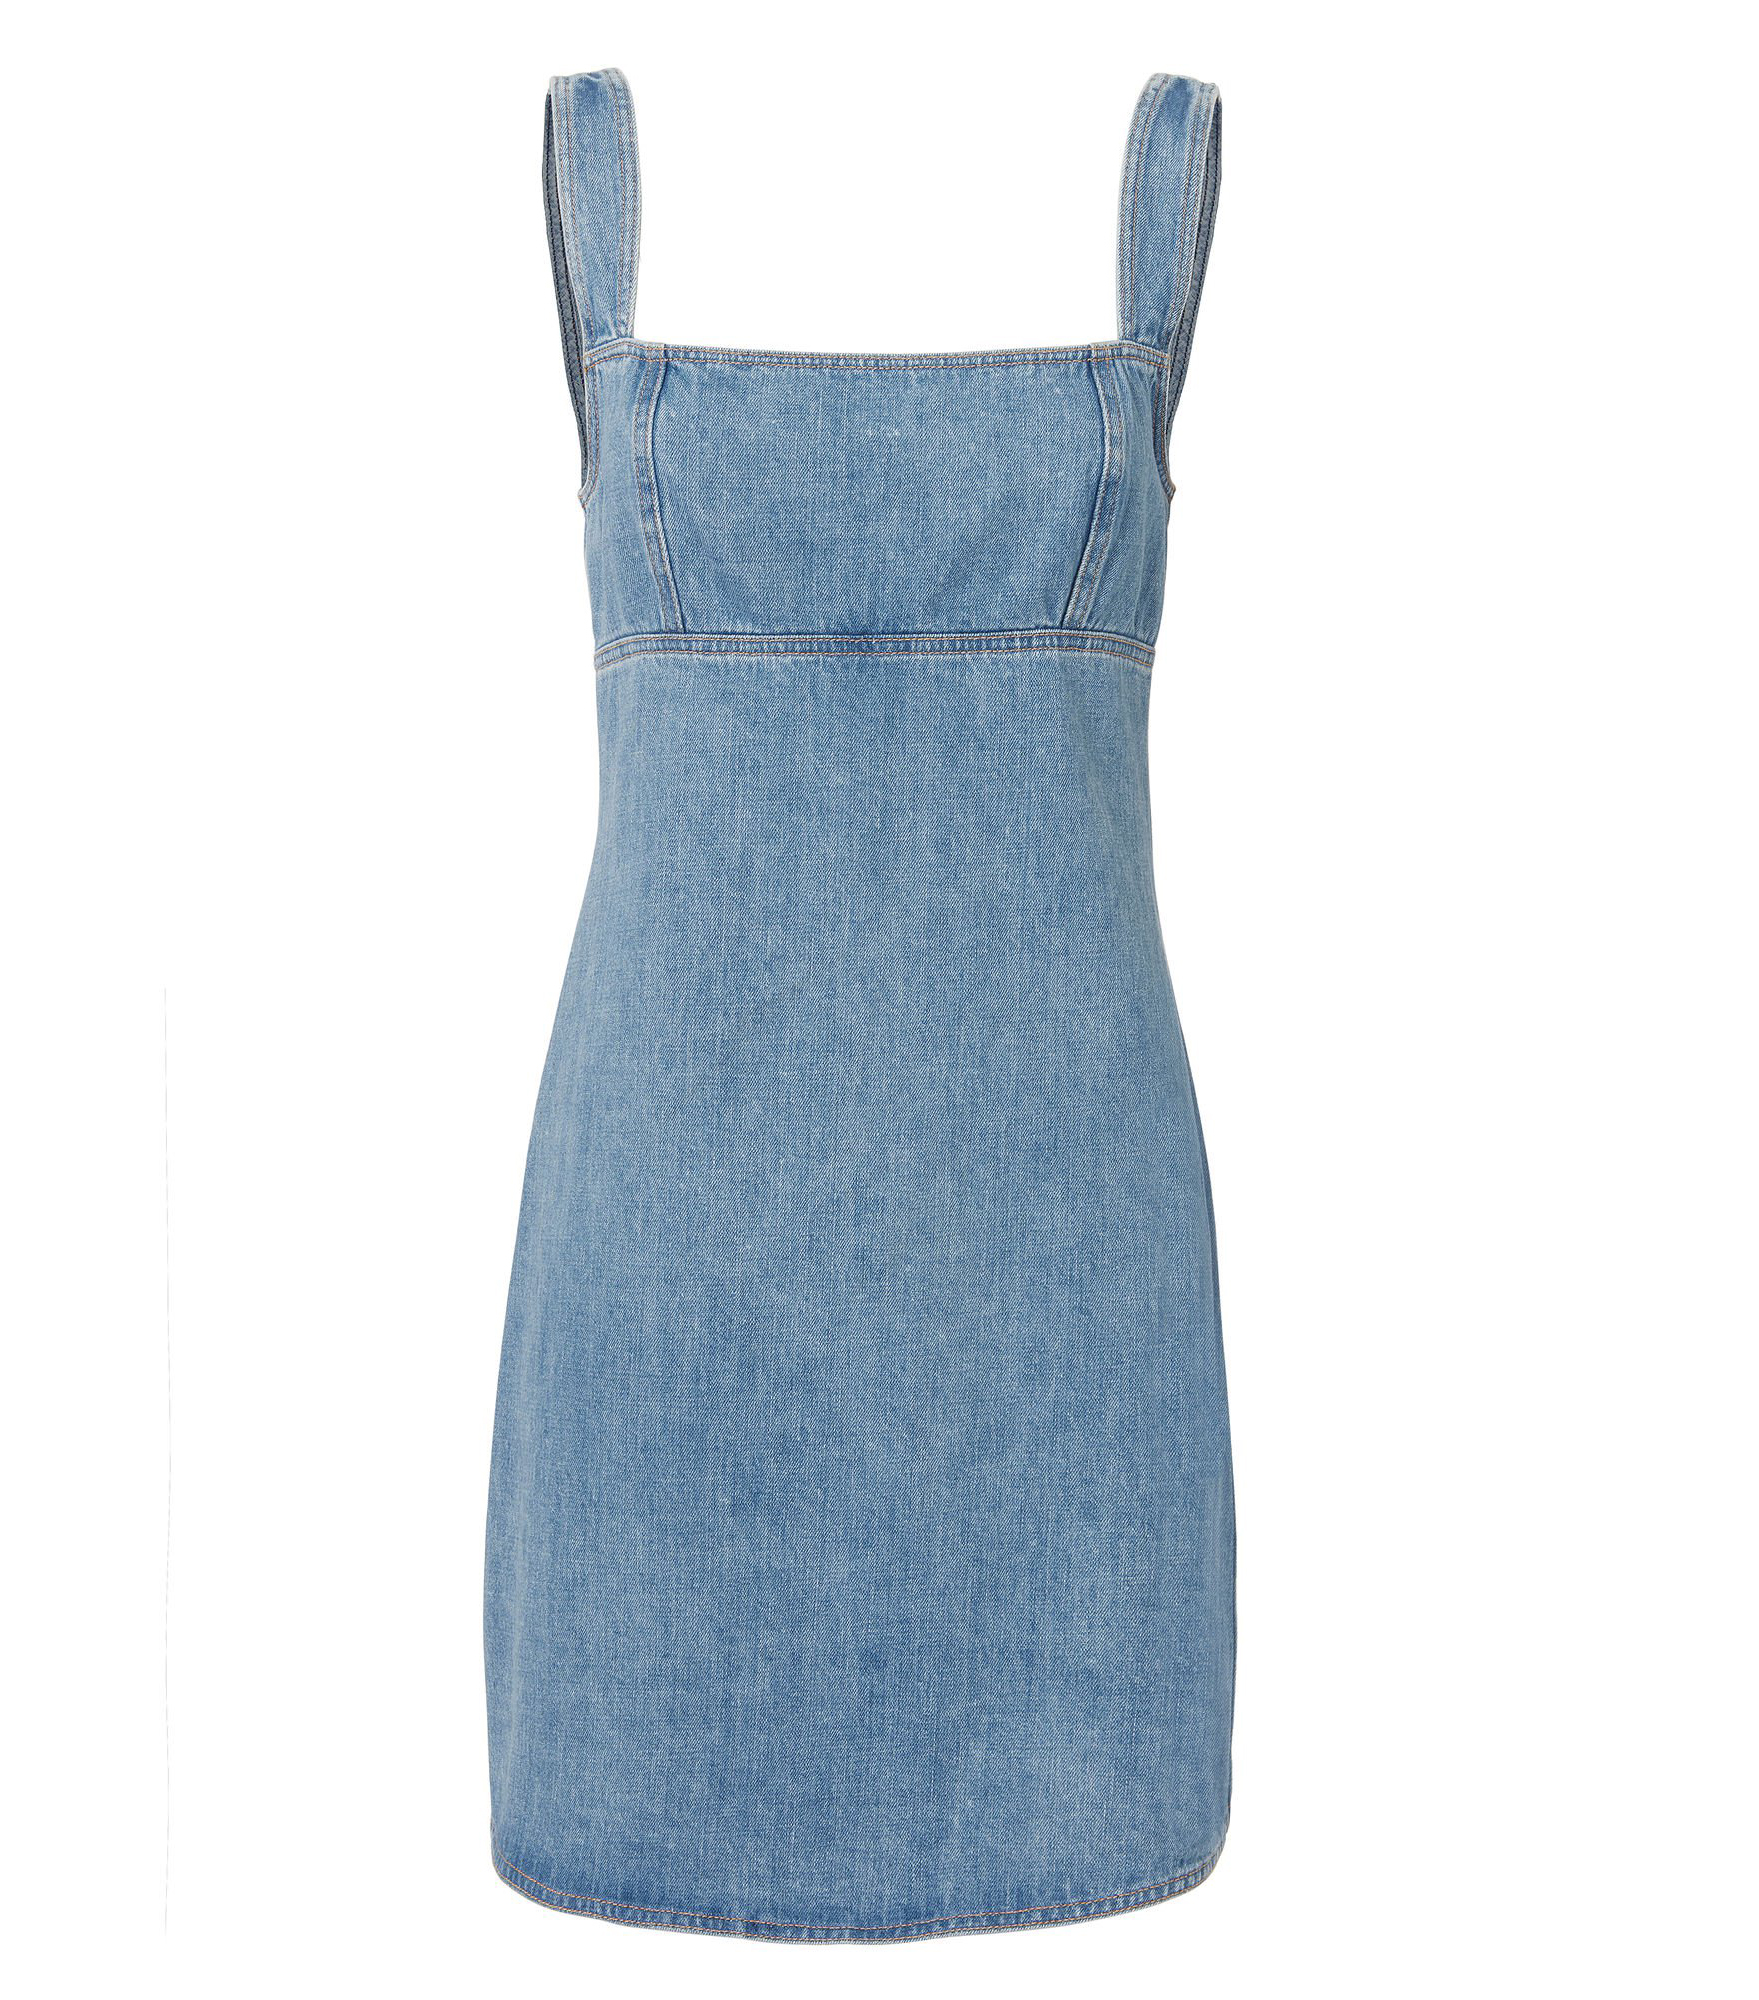 20 Reasons We Love Fitted Denim Dresses | Who What Wear